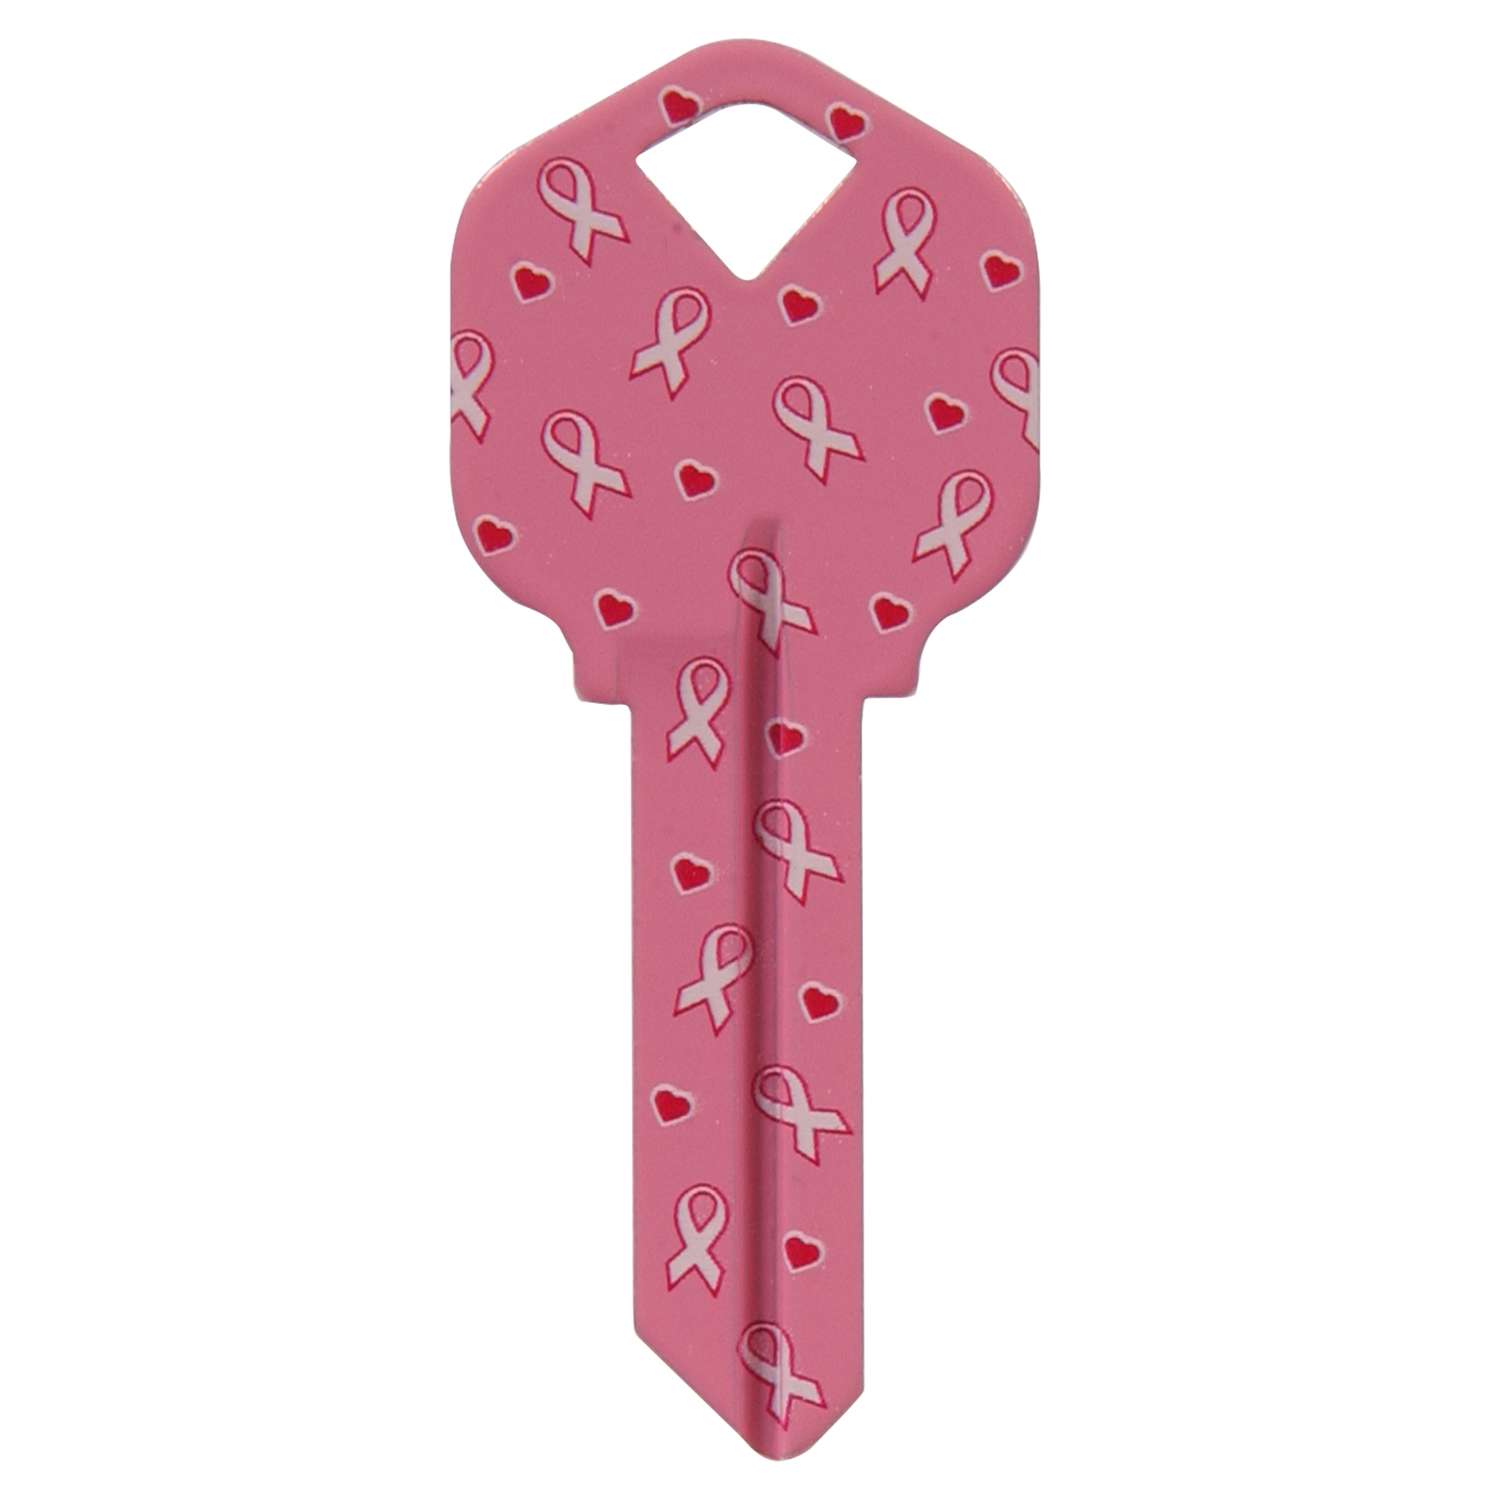 Details about   Clinique Breast Cancer Awareness Pink Ribbon Tassels Key Ring